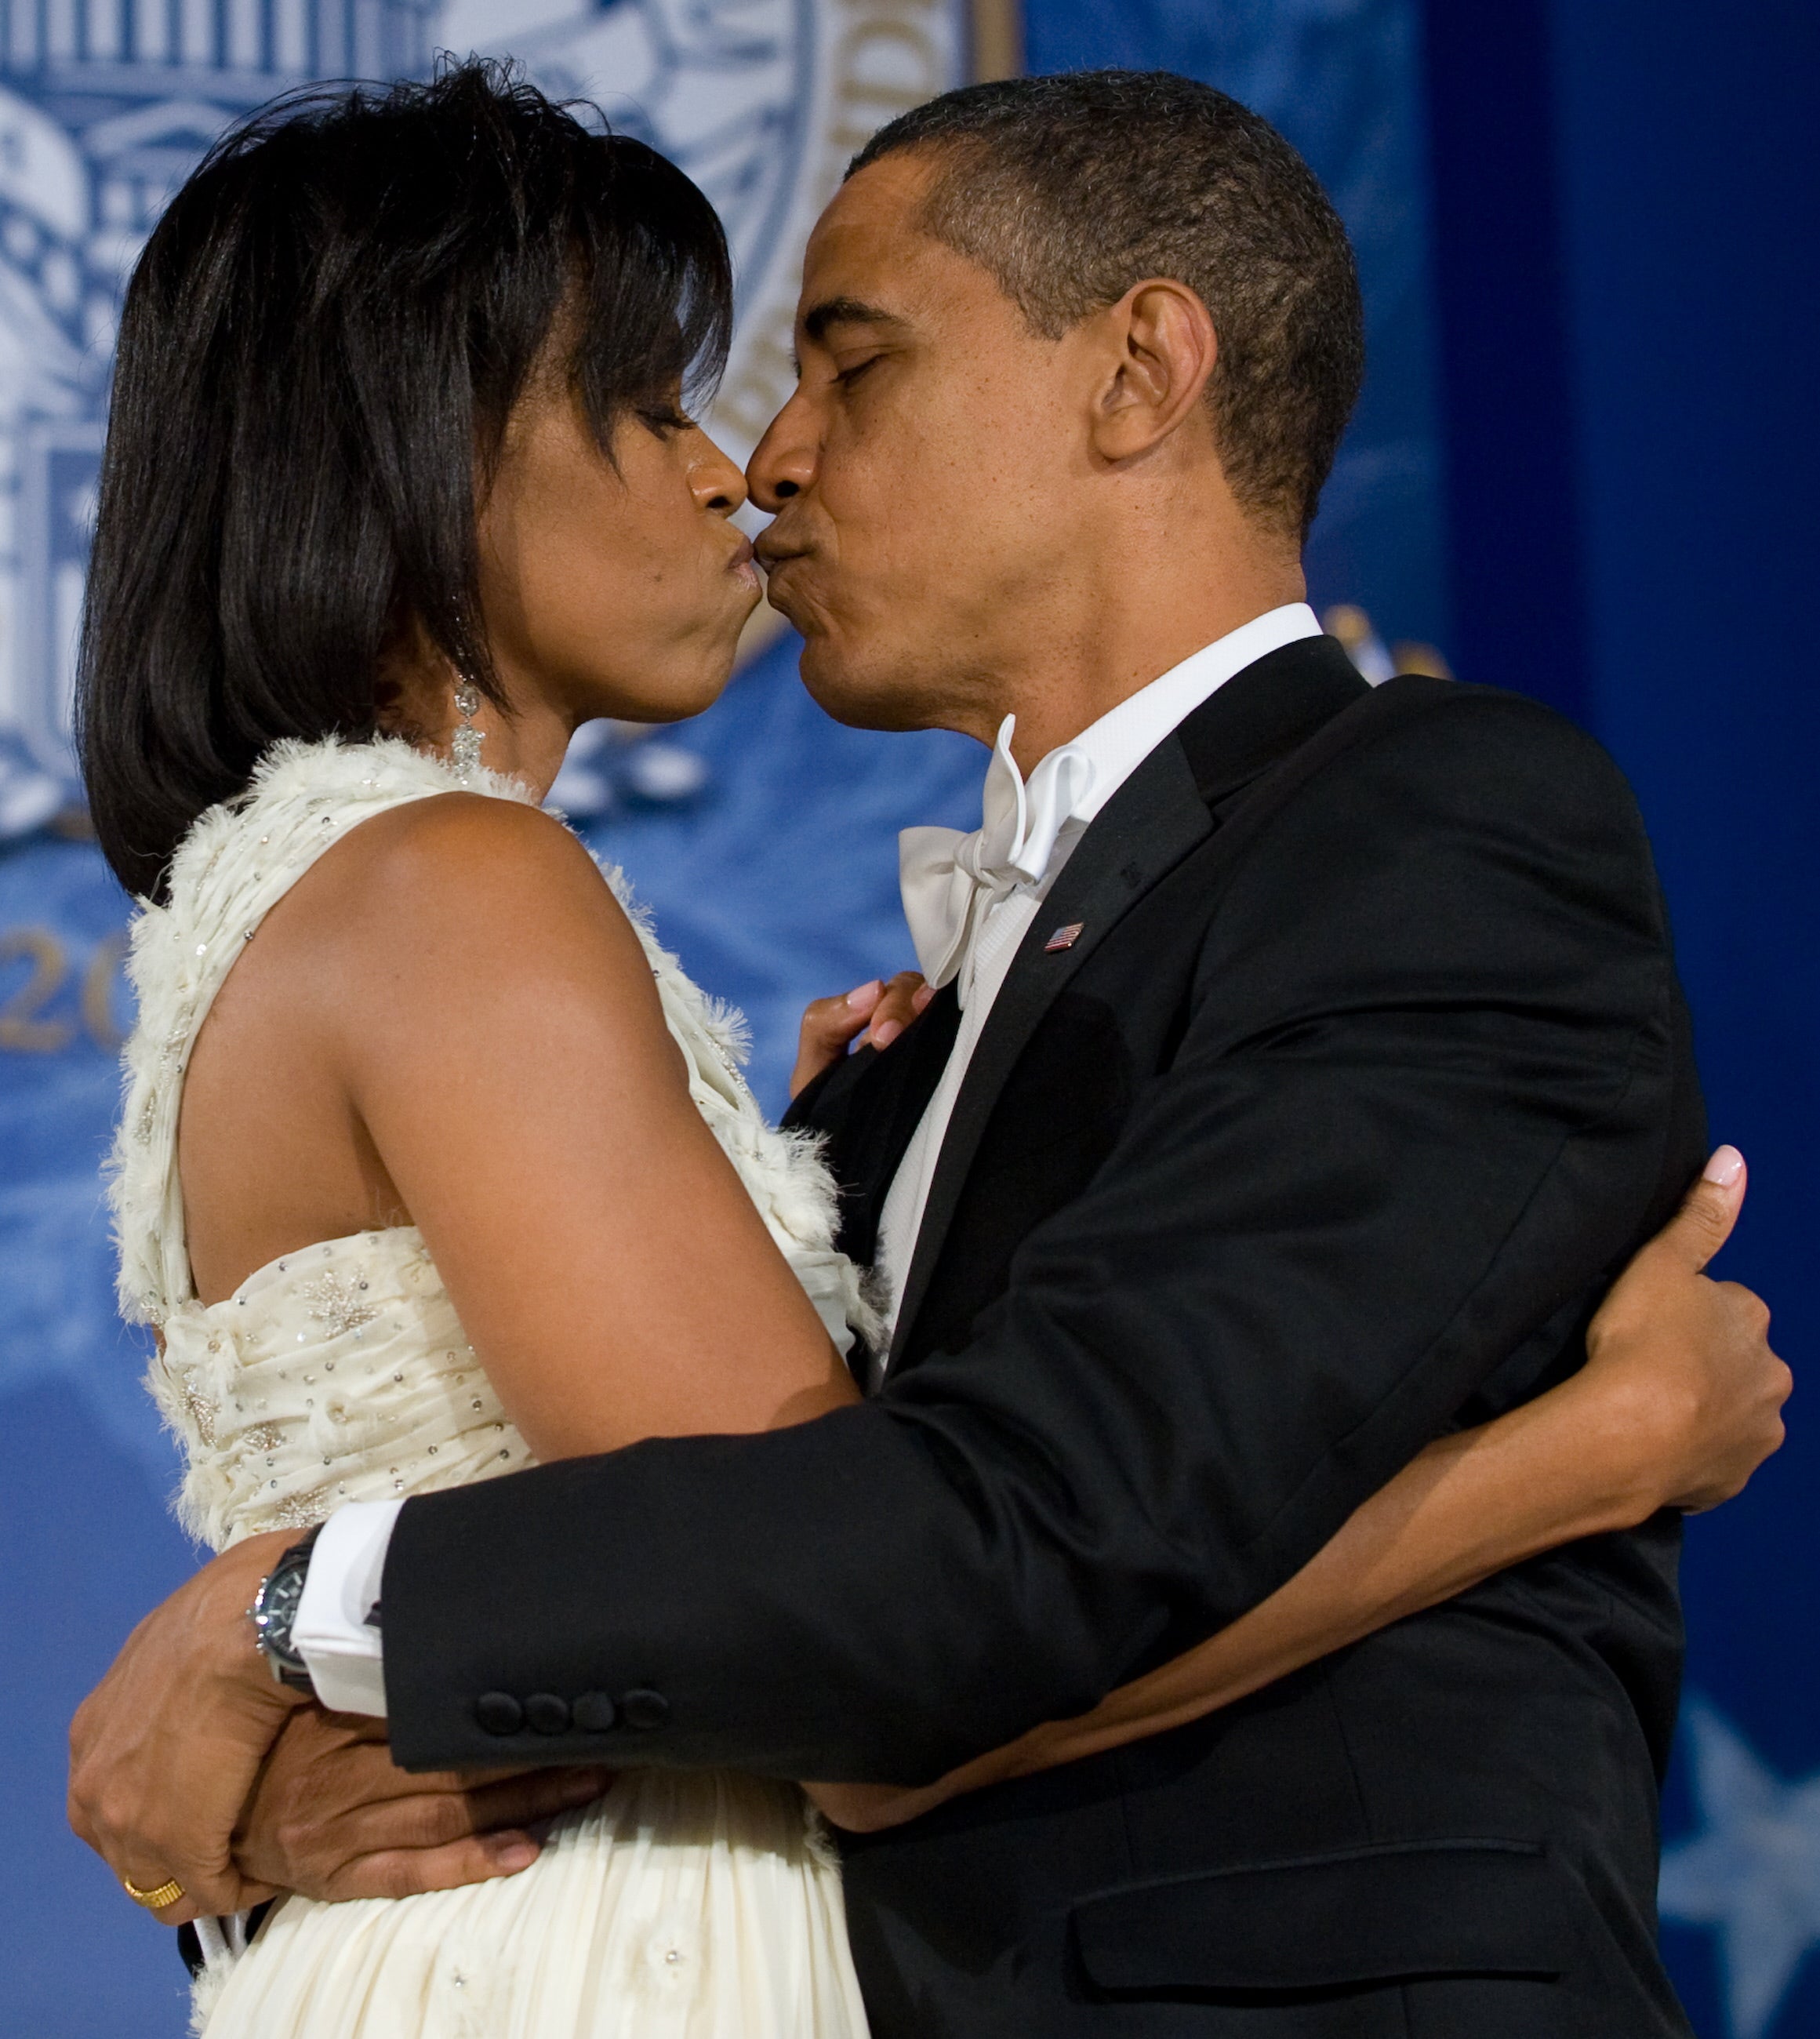 25 Of The Sweetest Photos From Barack And Michelle Obama's 25 Year Marriage
